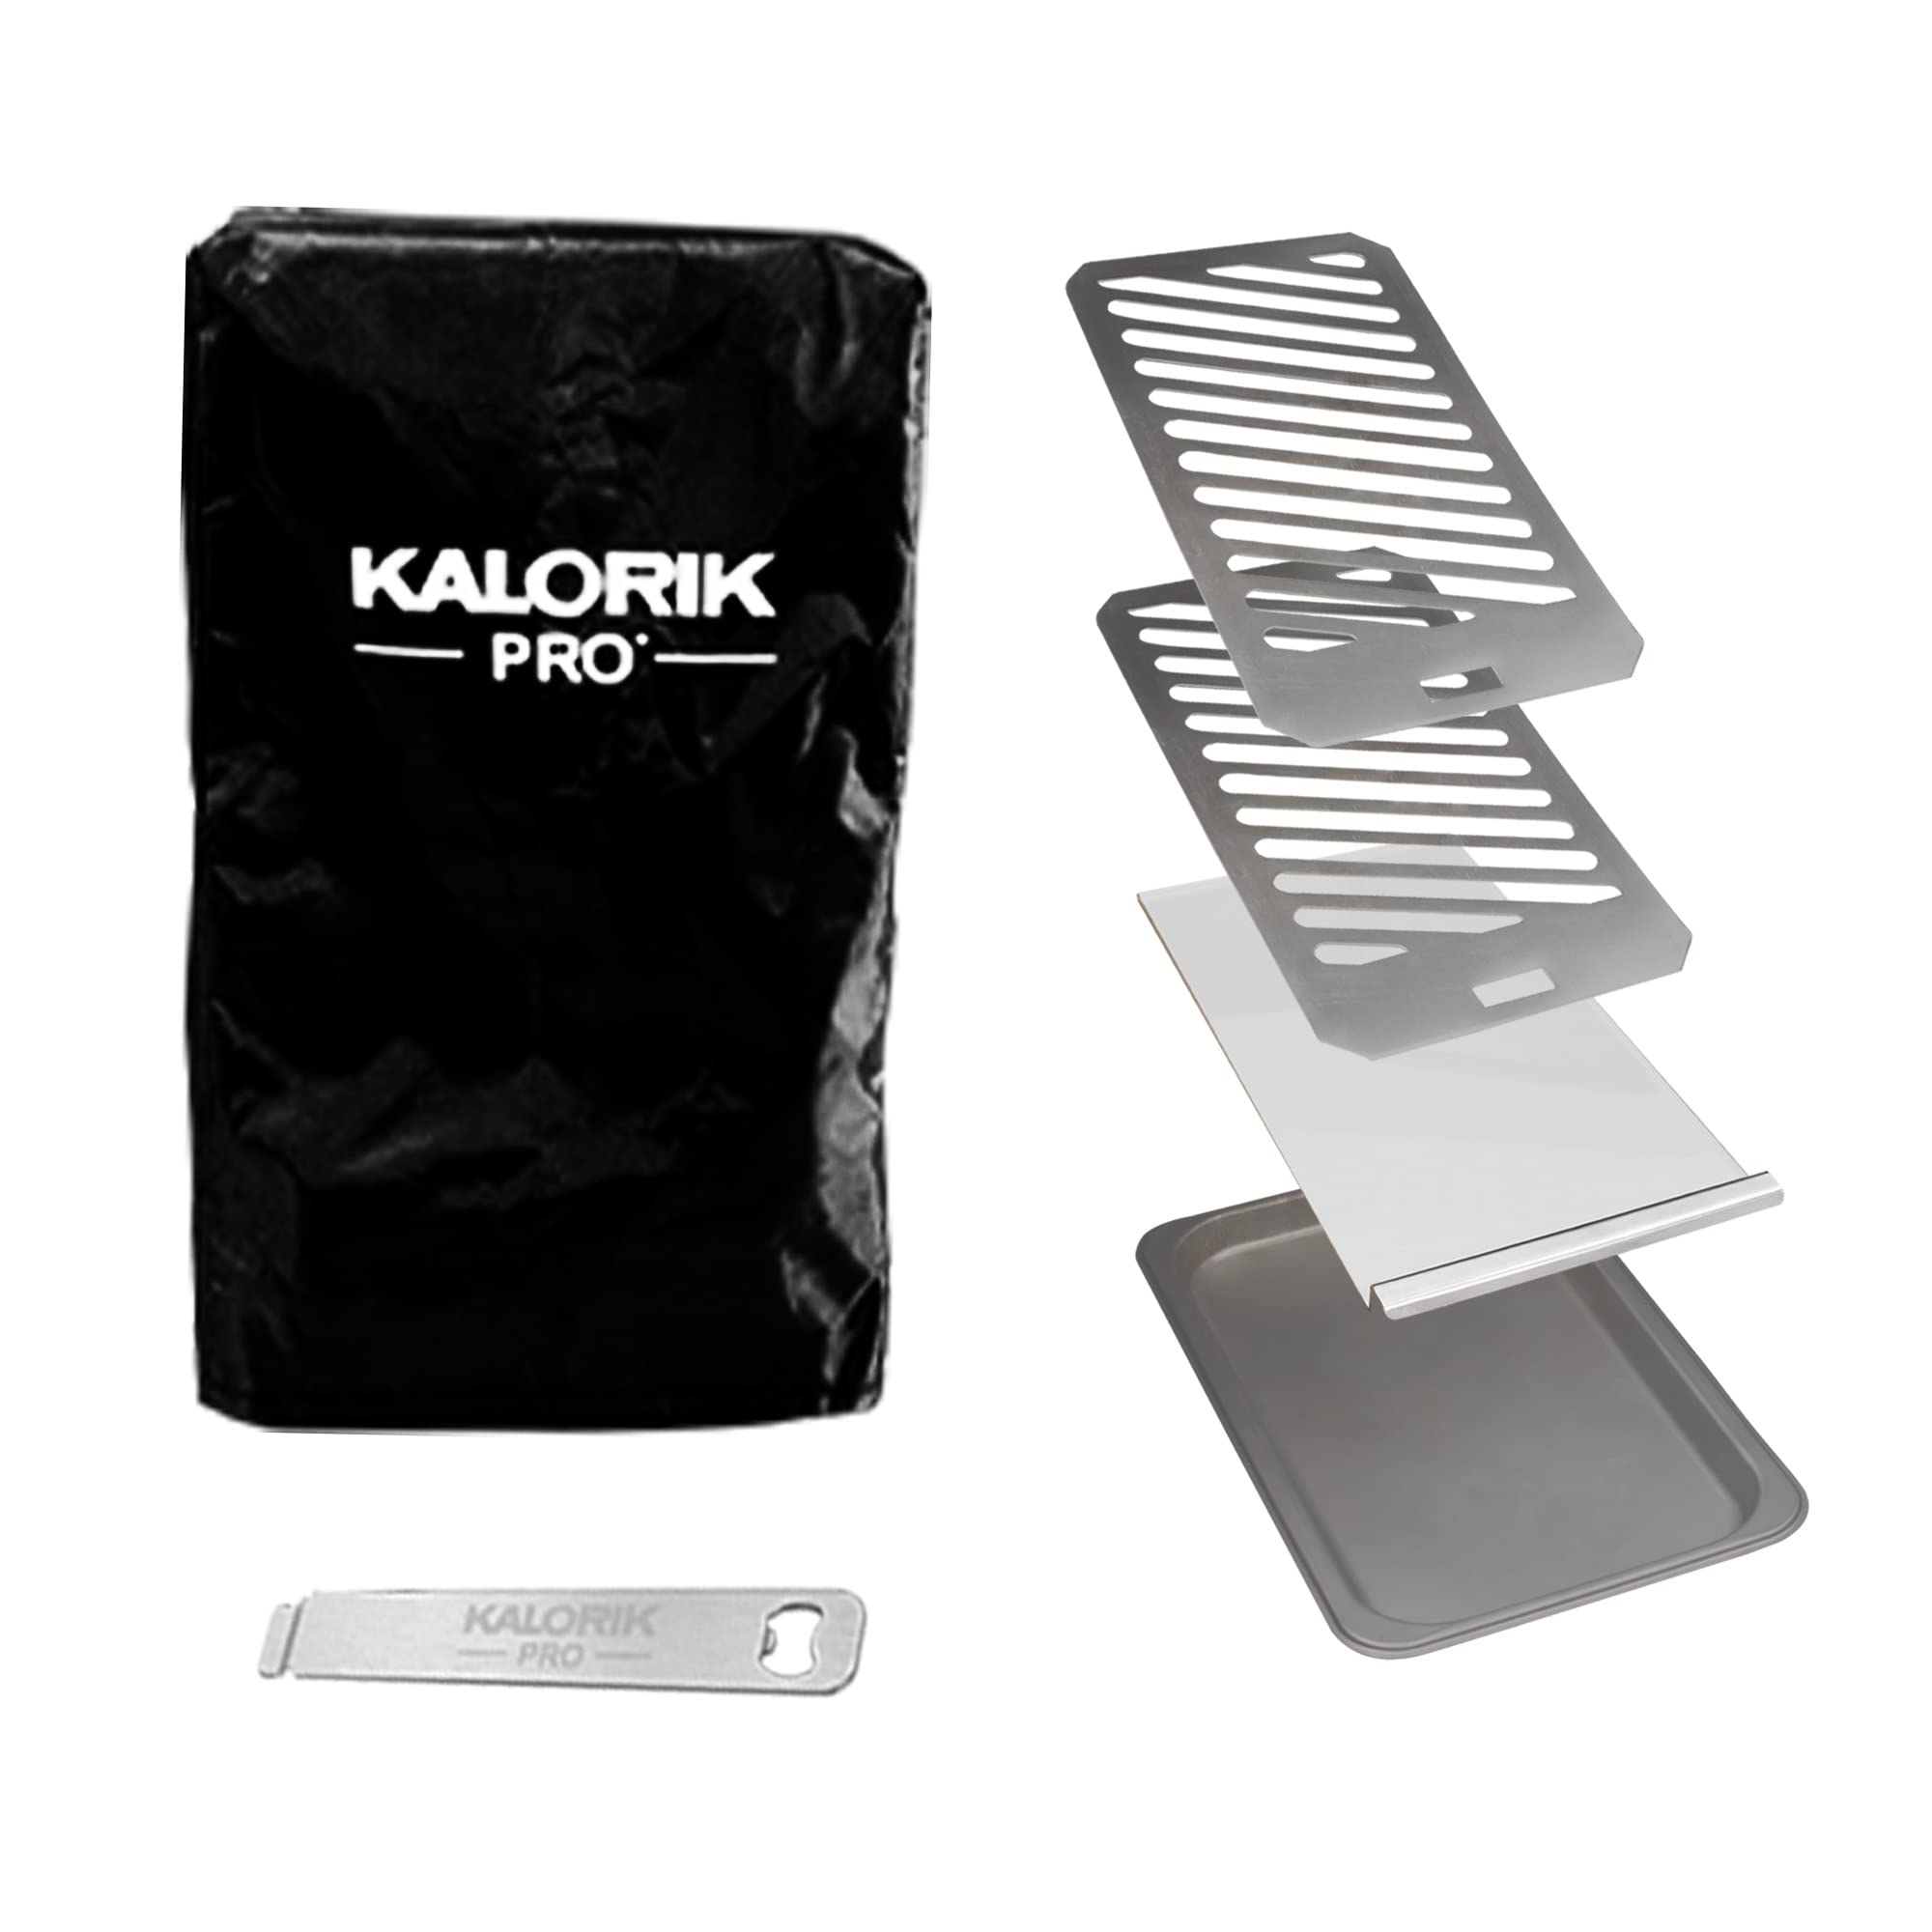 Kalorik® Professional Electric Smokeless Indoor Grill, Restaurant Quality 1500°F Searing, Premium Steak House Style with Perfect Caramelization, Digital LCD Display, Time & Temperature Control, 6 Accessories, 1600W, Easy Clean, Stainless Steel